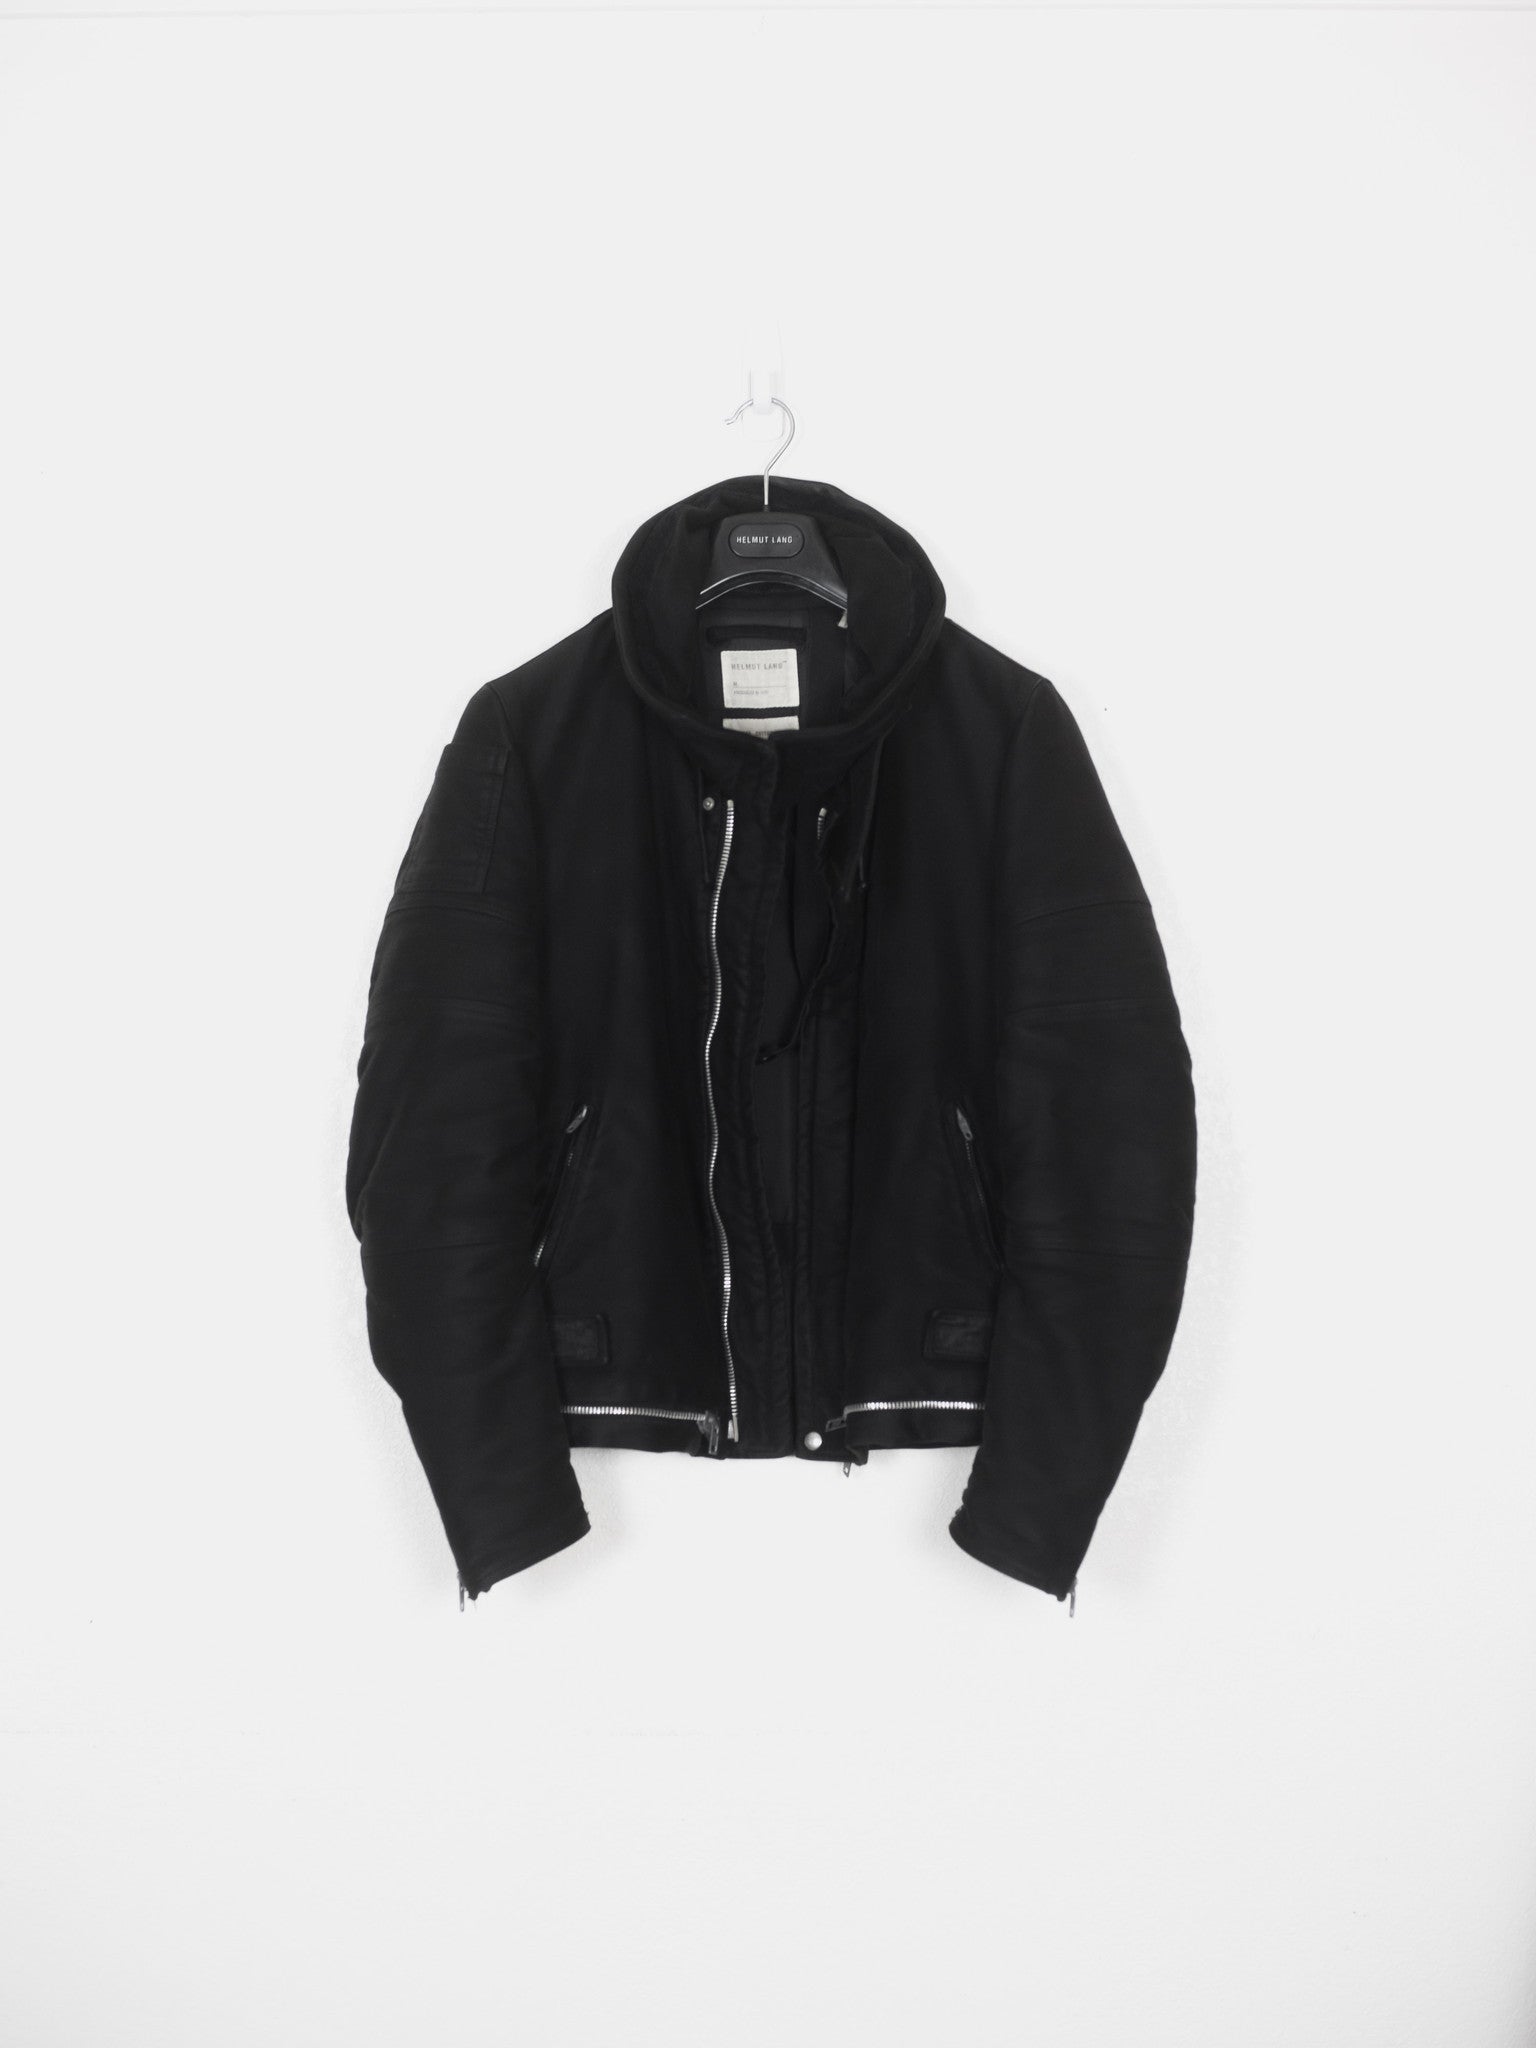 Helmut Lang AW1999 Leather Astro Jacket - ARCHIVED